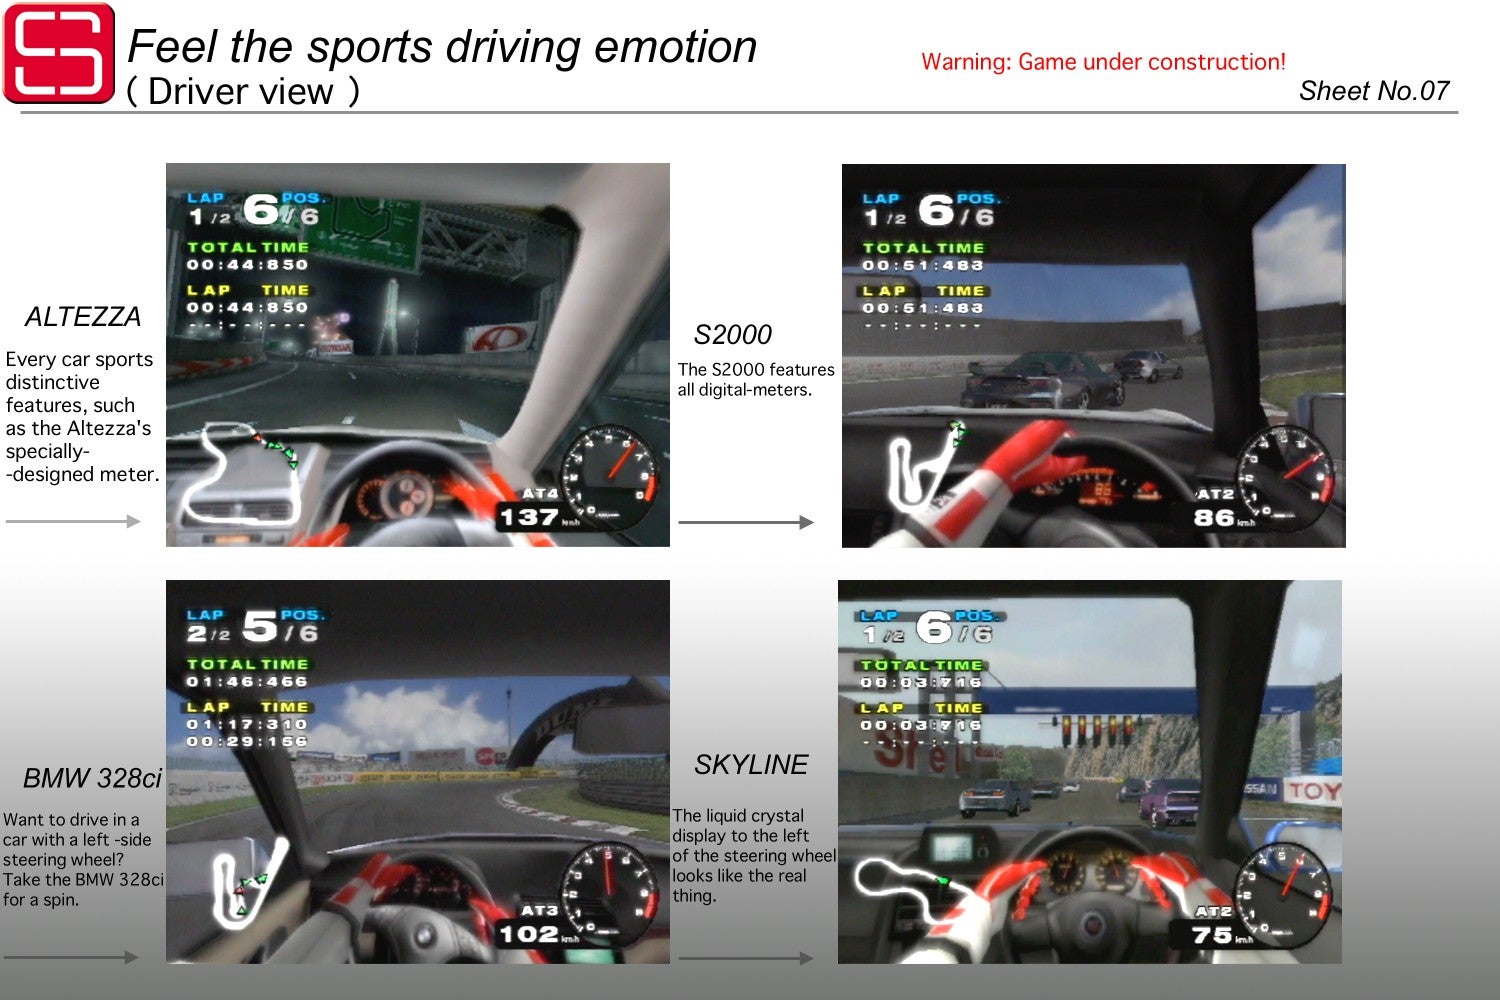 How One Of The Worst Racing Games Ever Taught Me To Enjoy Bad Things